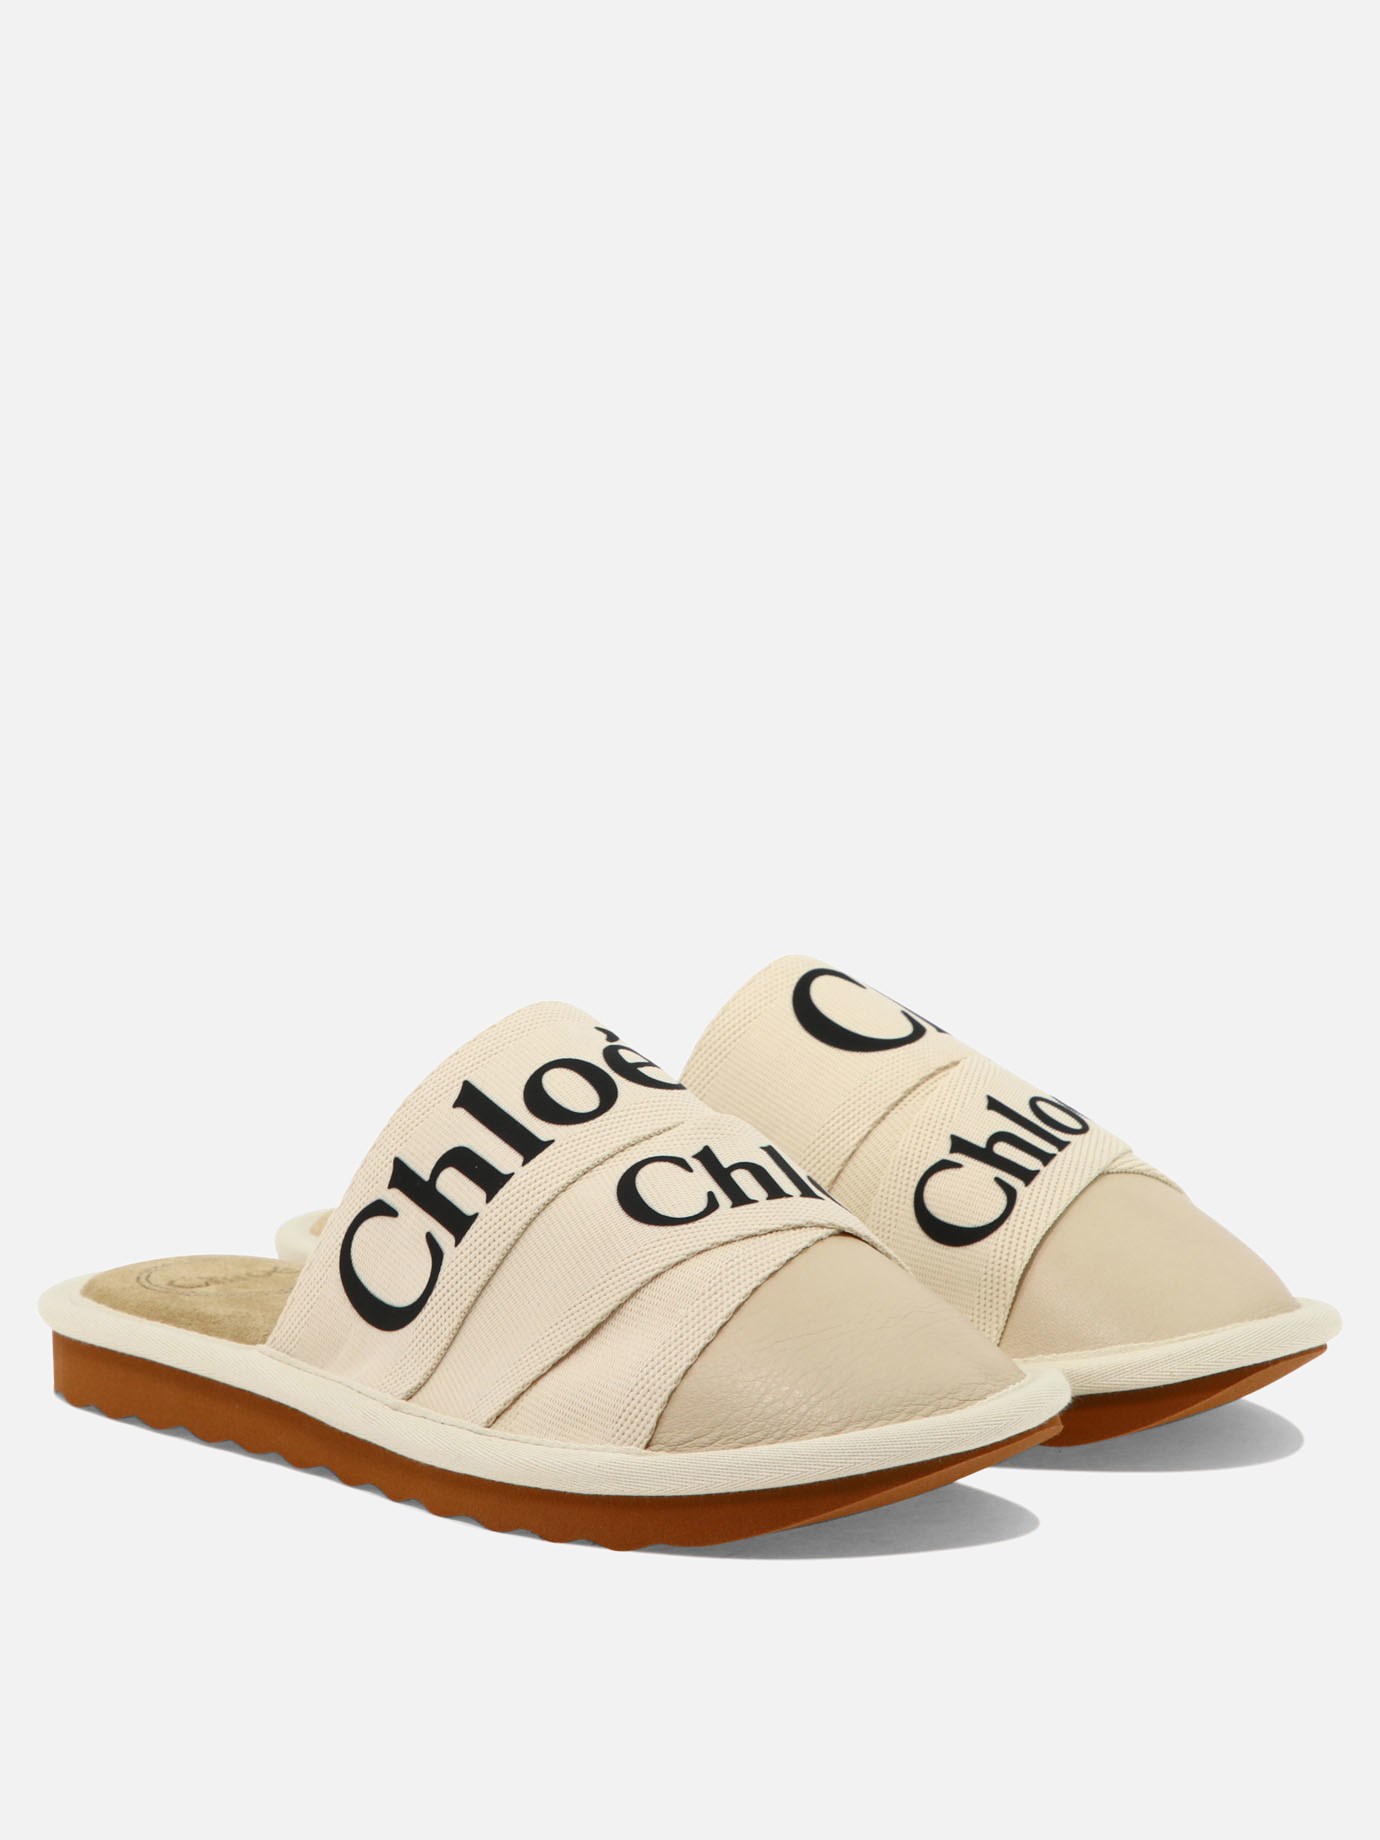  Woody  slippers by Chloé